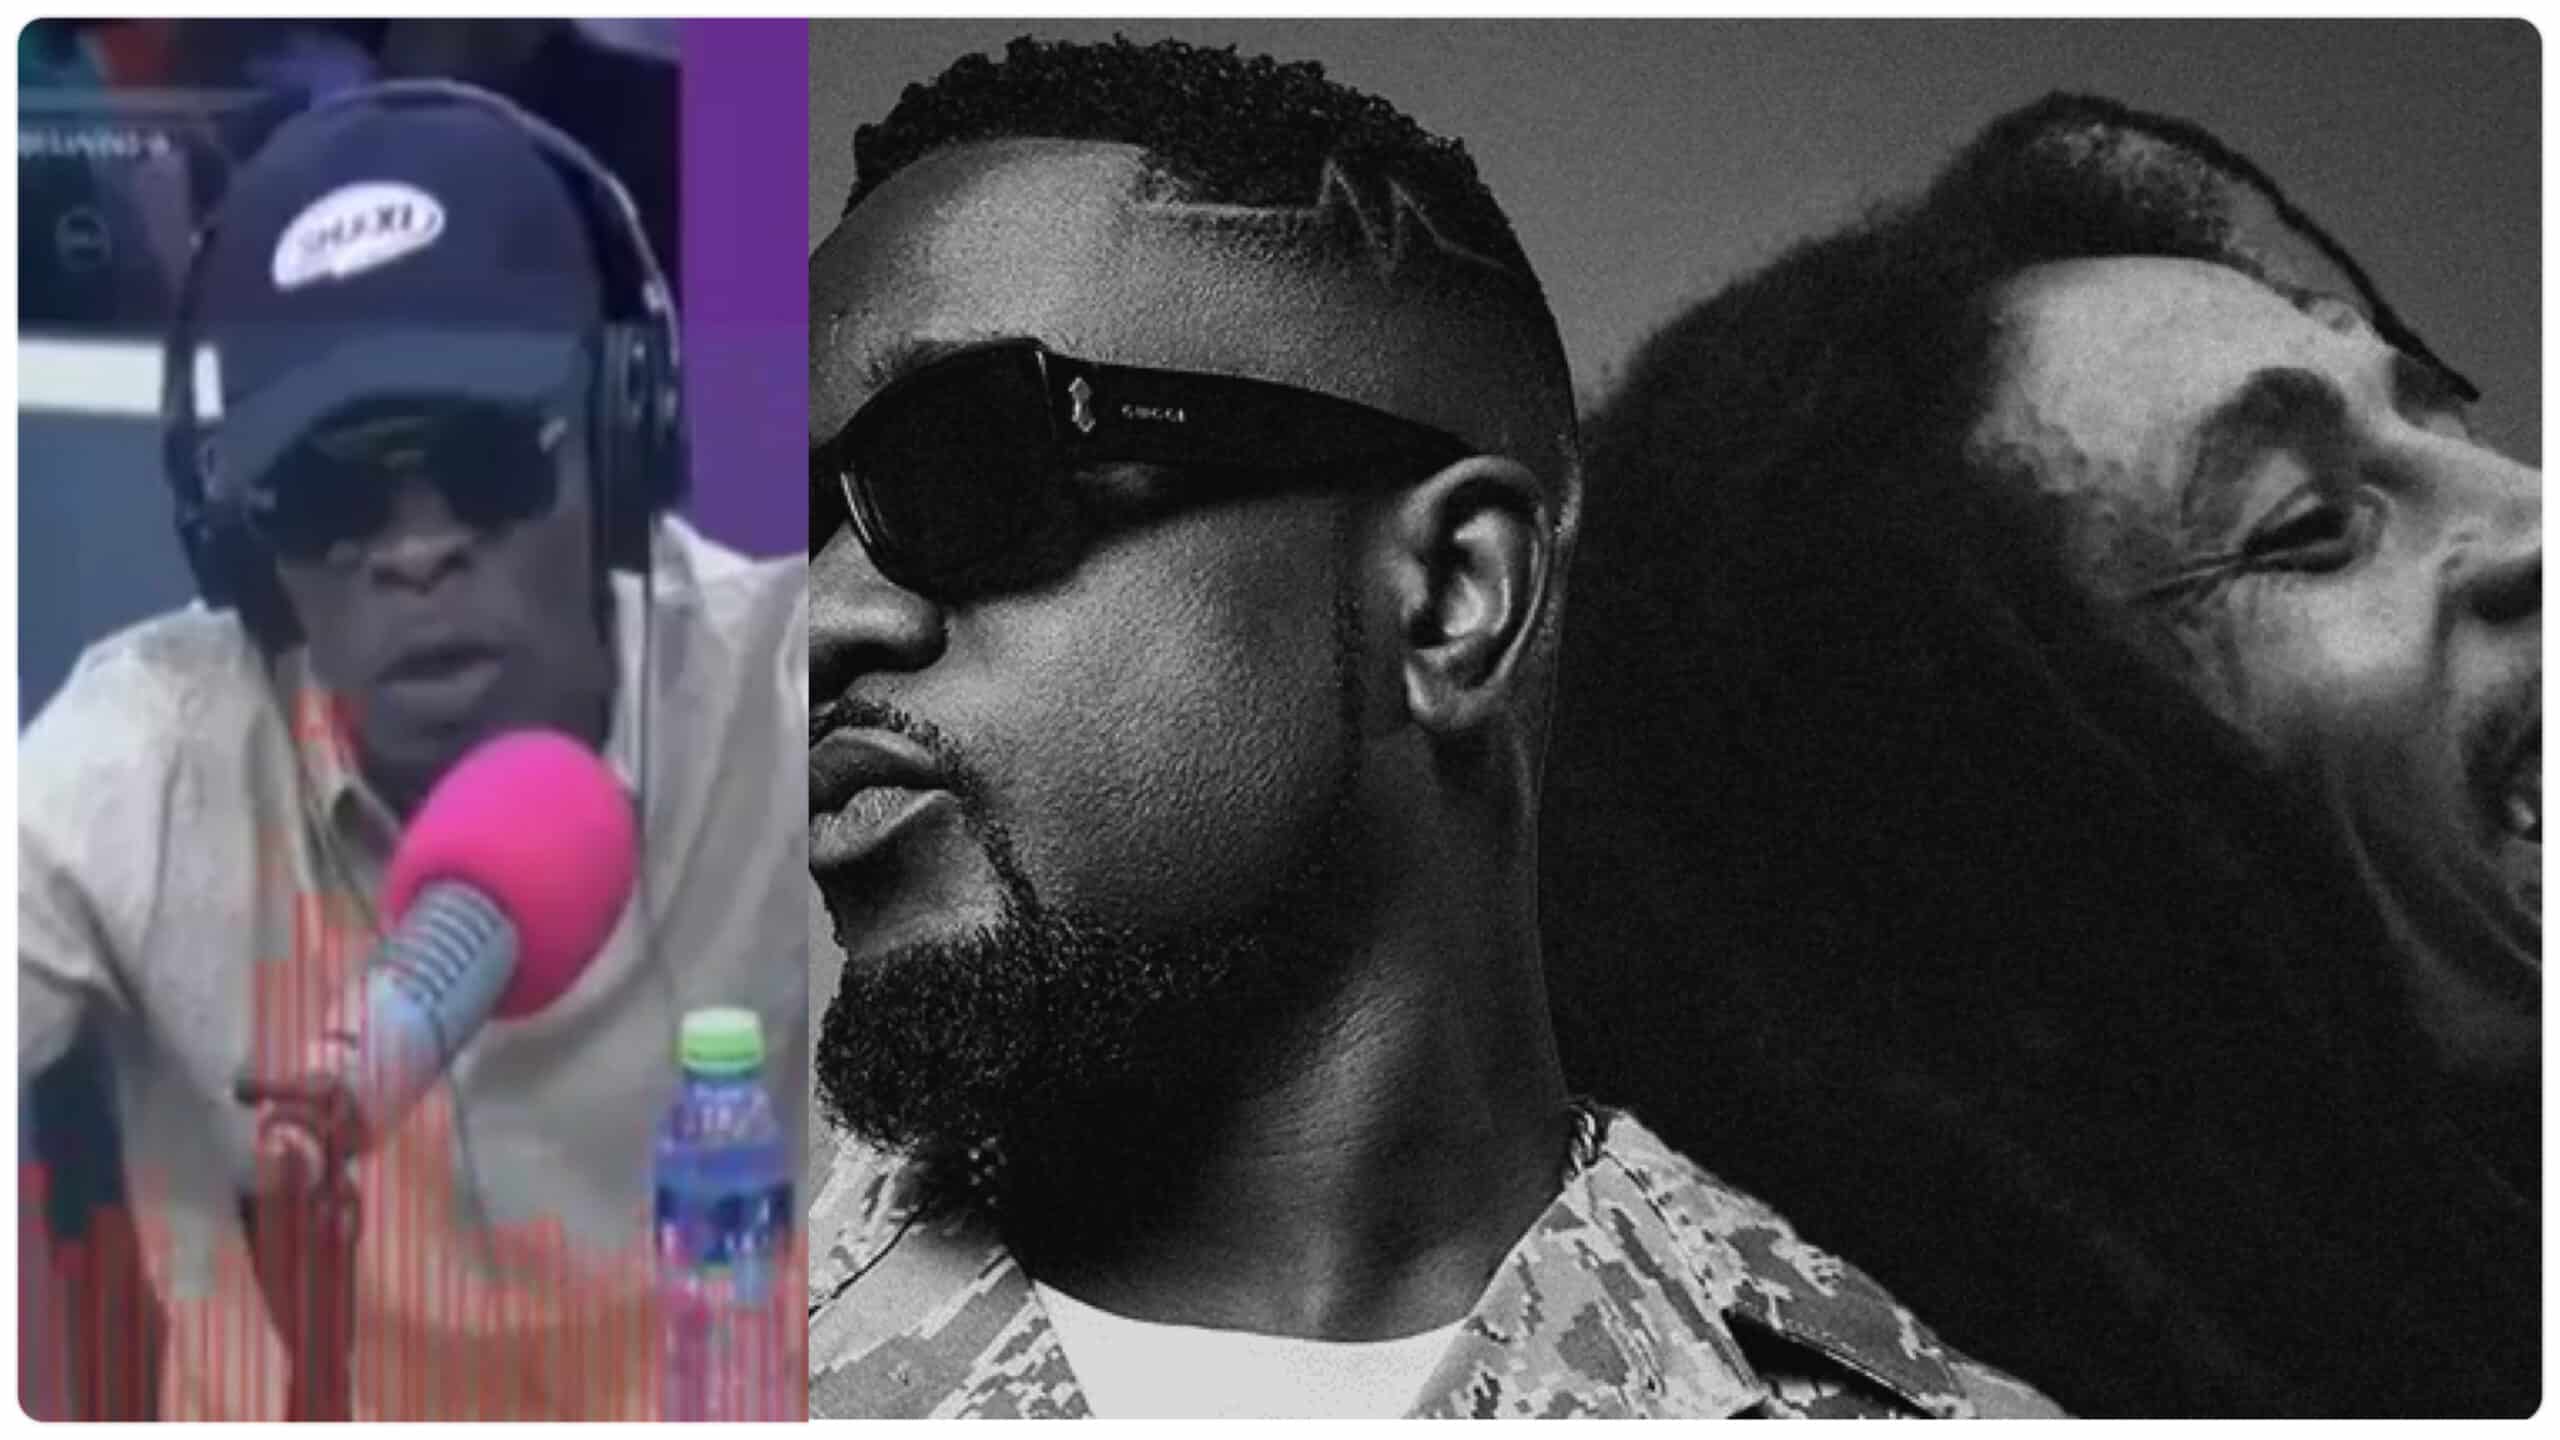 "Sarkodie has featured a ghost, it's nothing special" - Shatta Wale mocks